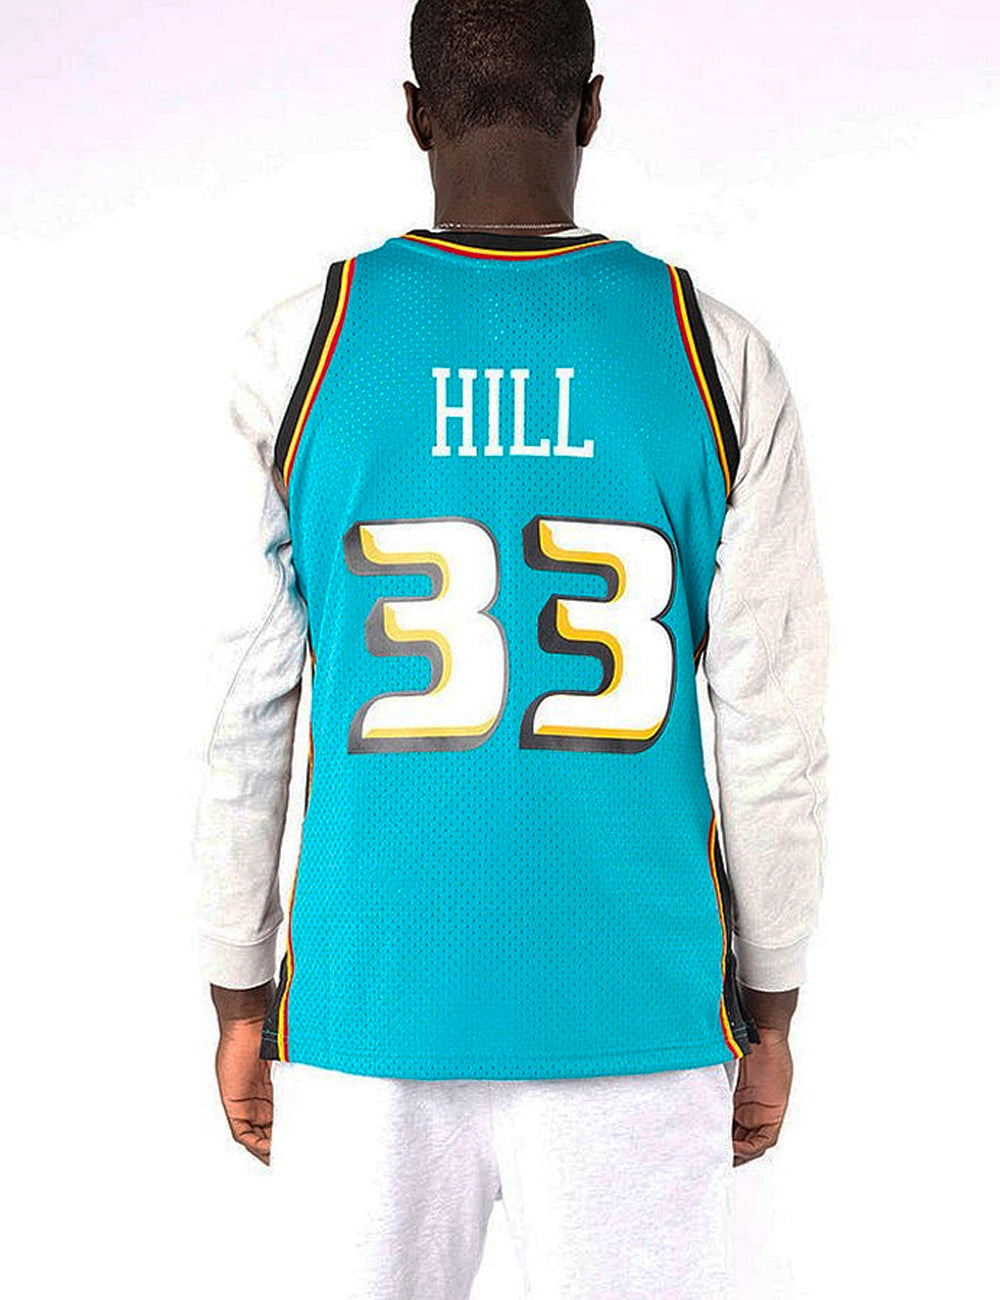 Grant Hill Detroit Pistons Mitchell & Ness Road 1998/99 Hardwood Classics Authentic  Jersey - Teal